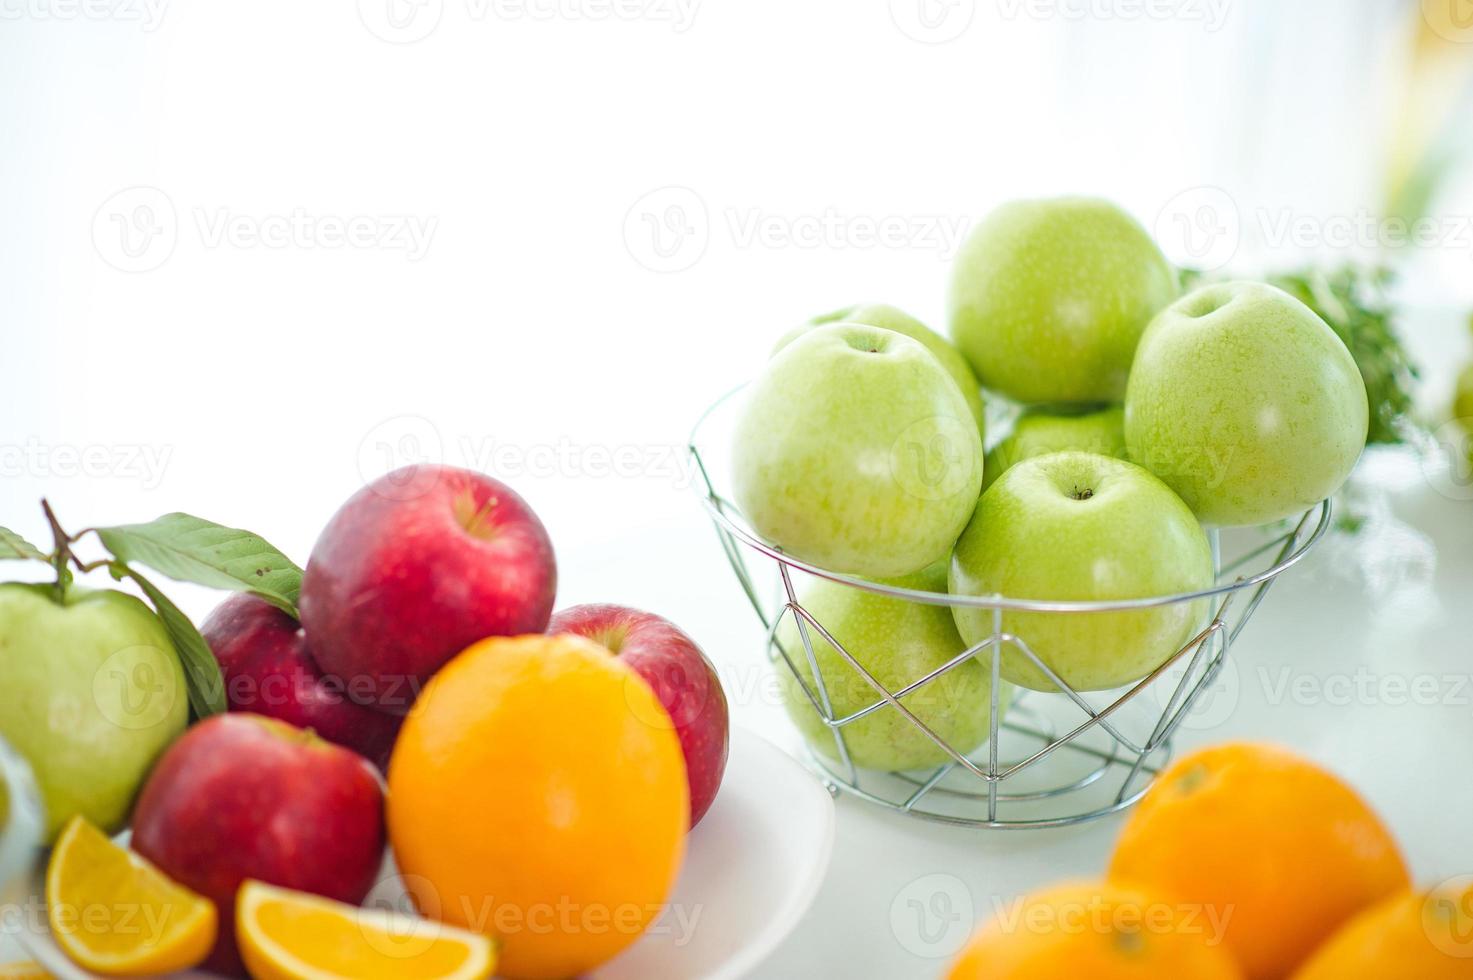 The fruits of health lover Healthy fruit And health care to eat healthy food. To the skin. The fruit is placed in a beautiful table, apple apricot, banana, orange, dragon, placed photo